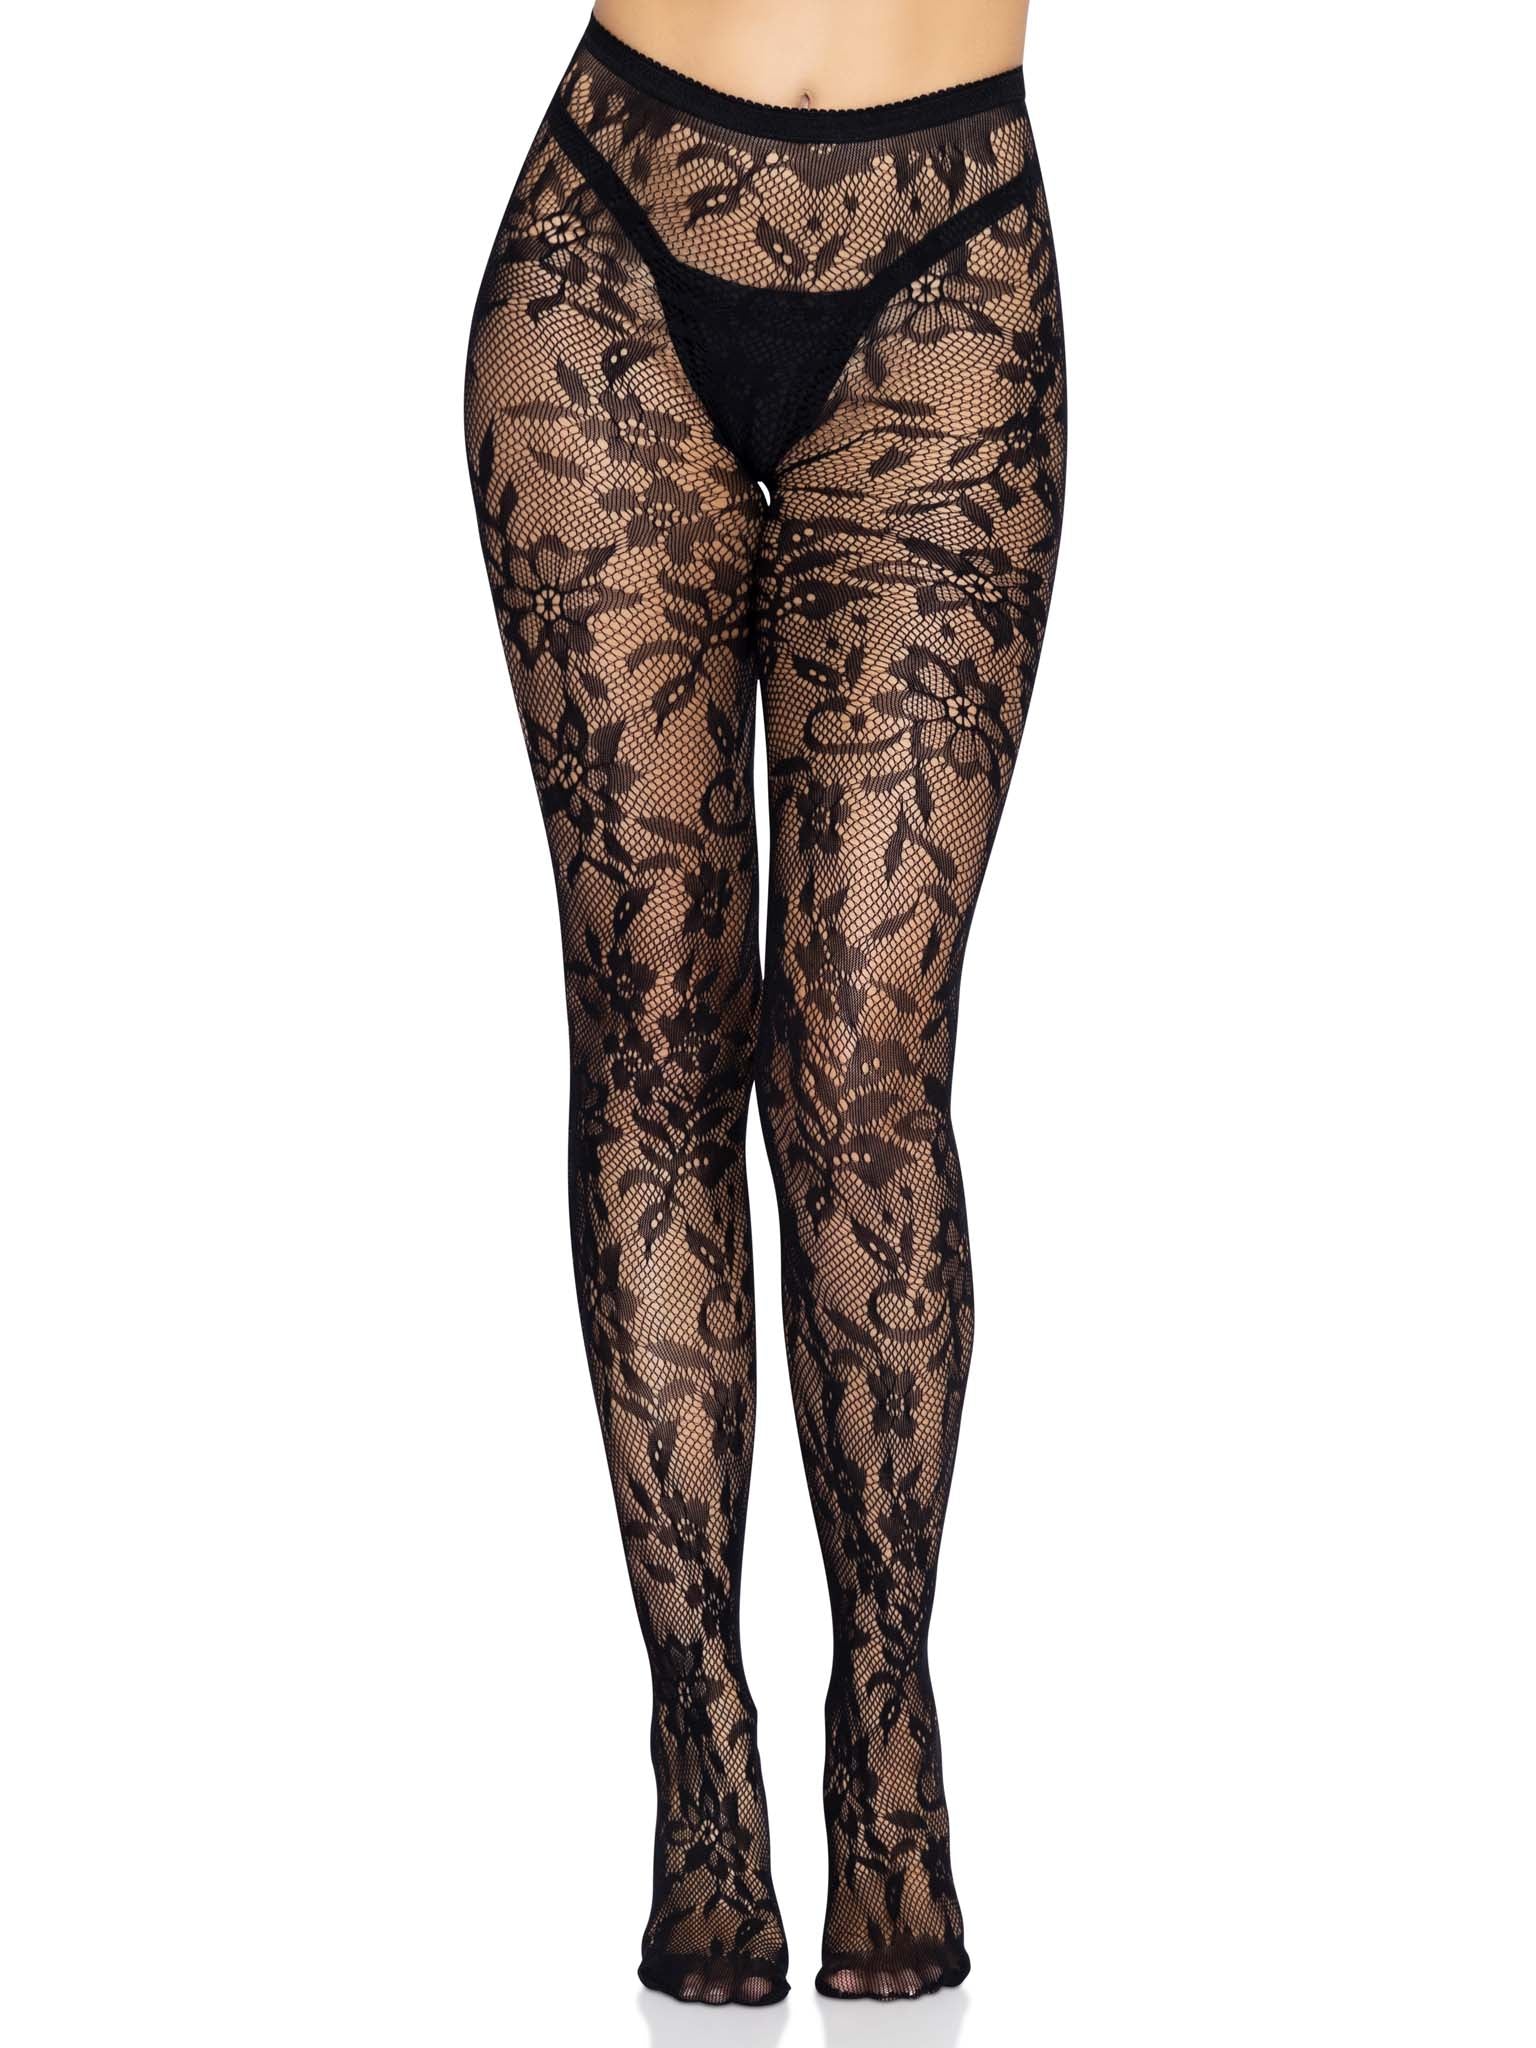 1pc Lace Tights For Women, Hollow Out Floral Sheer Pantyhose